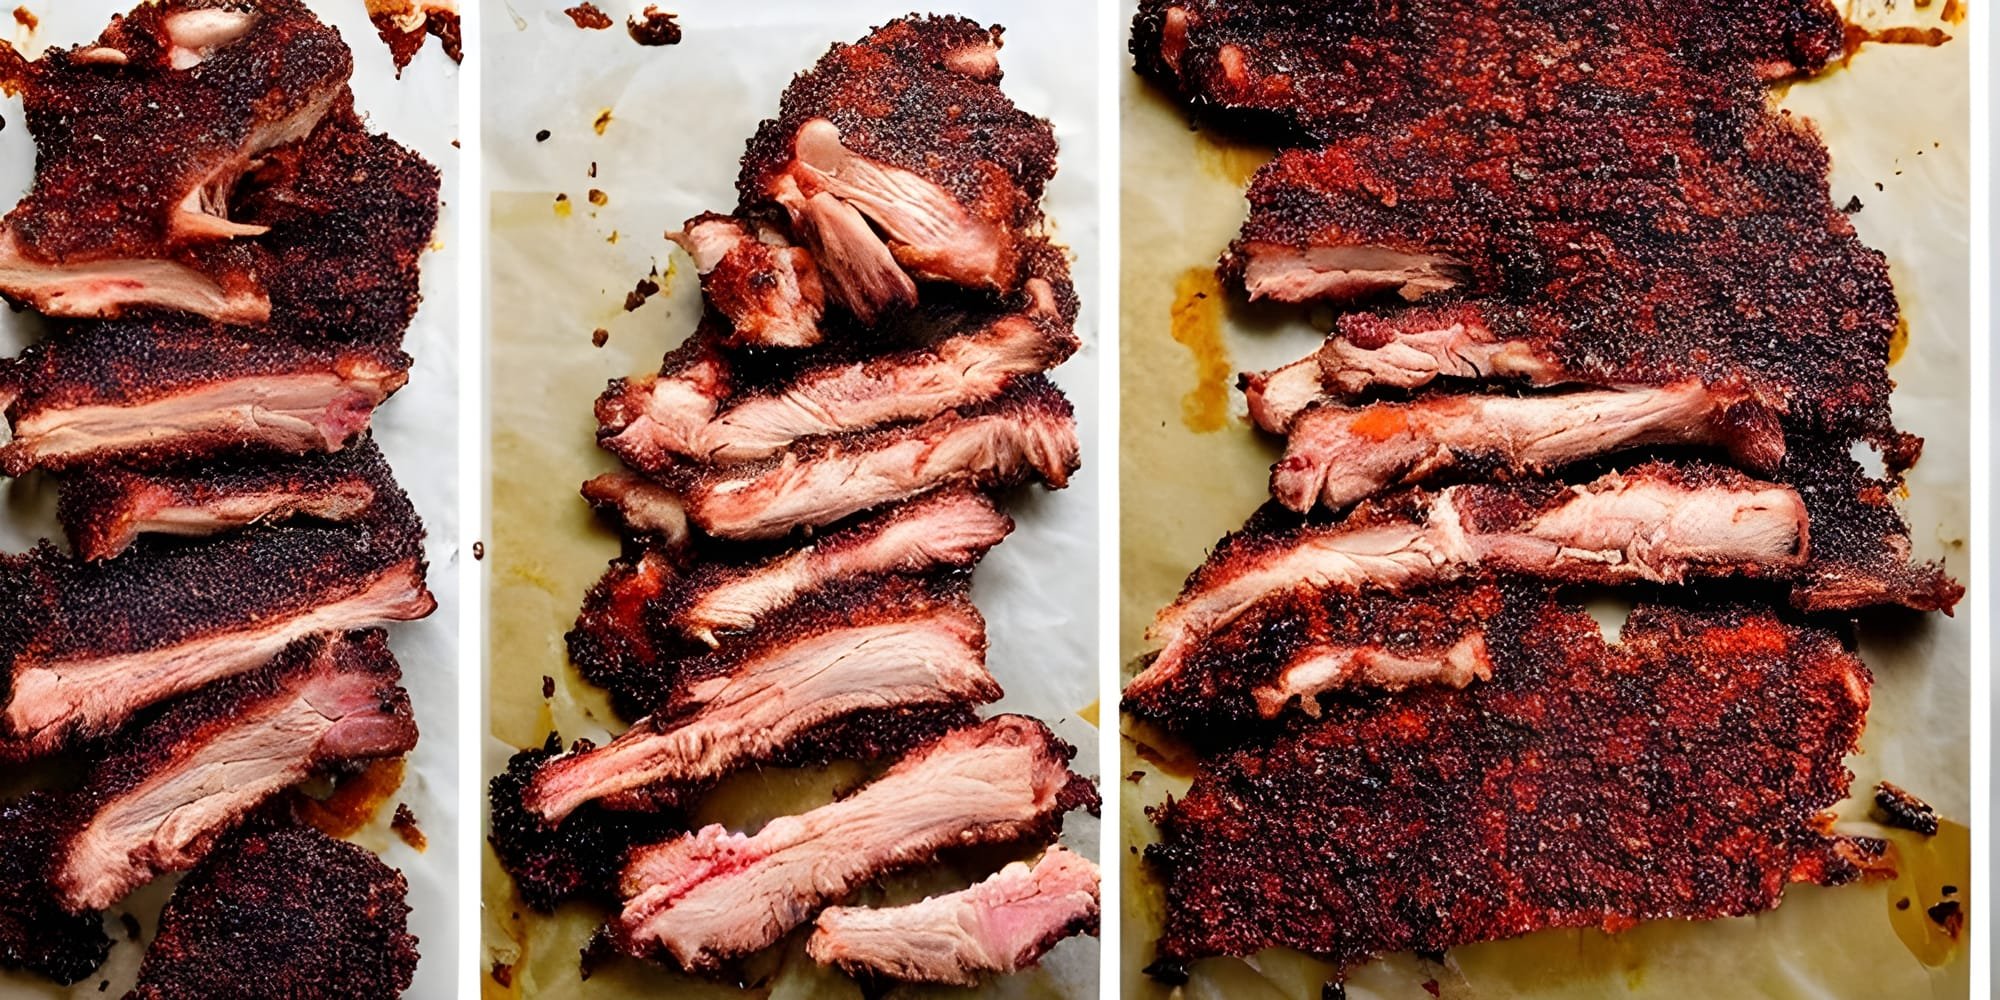 Take Your Ribs to the Next Level: A Step-by-Step Guide to Creating a Mouthwatering Dry Rub in the Oven